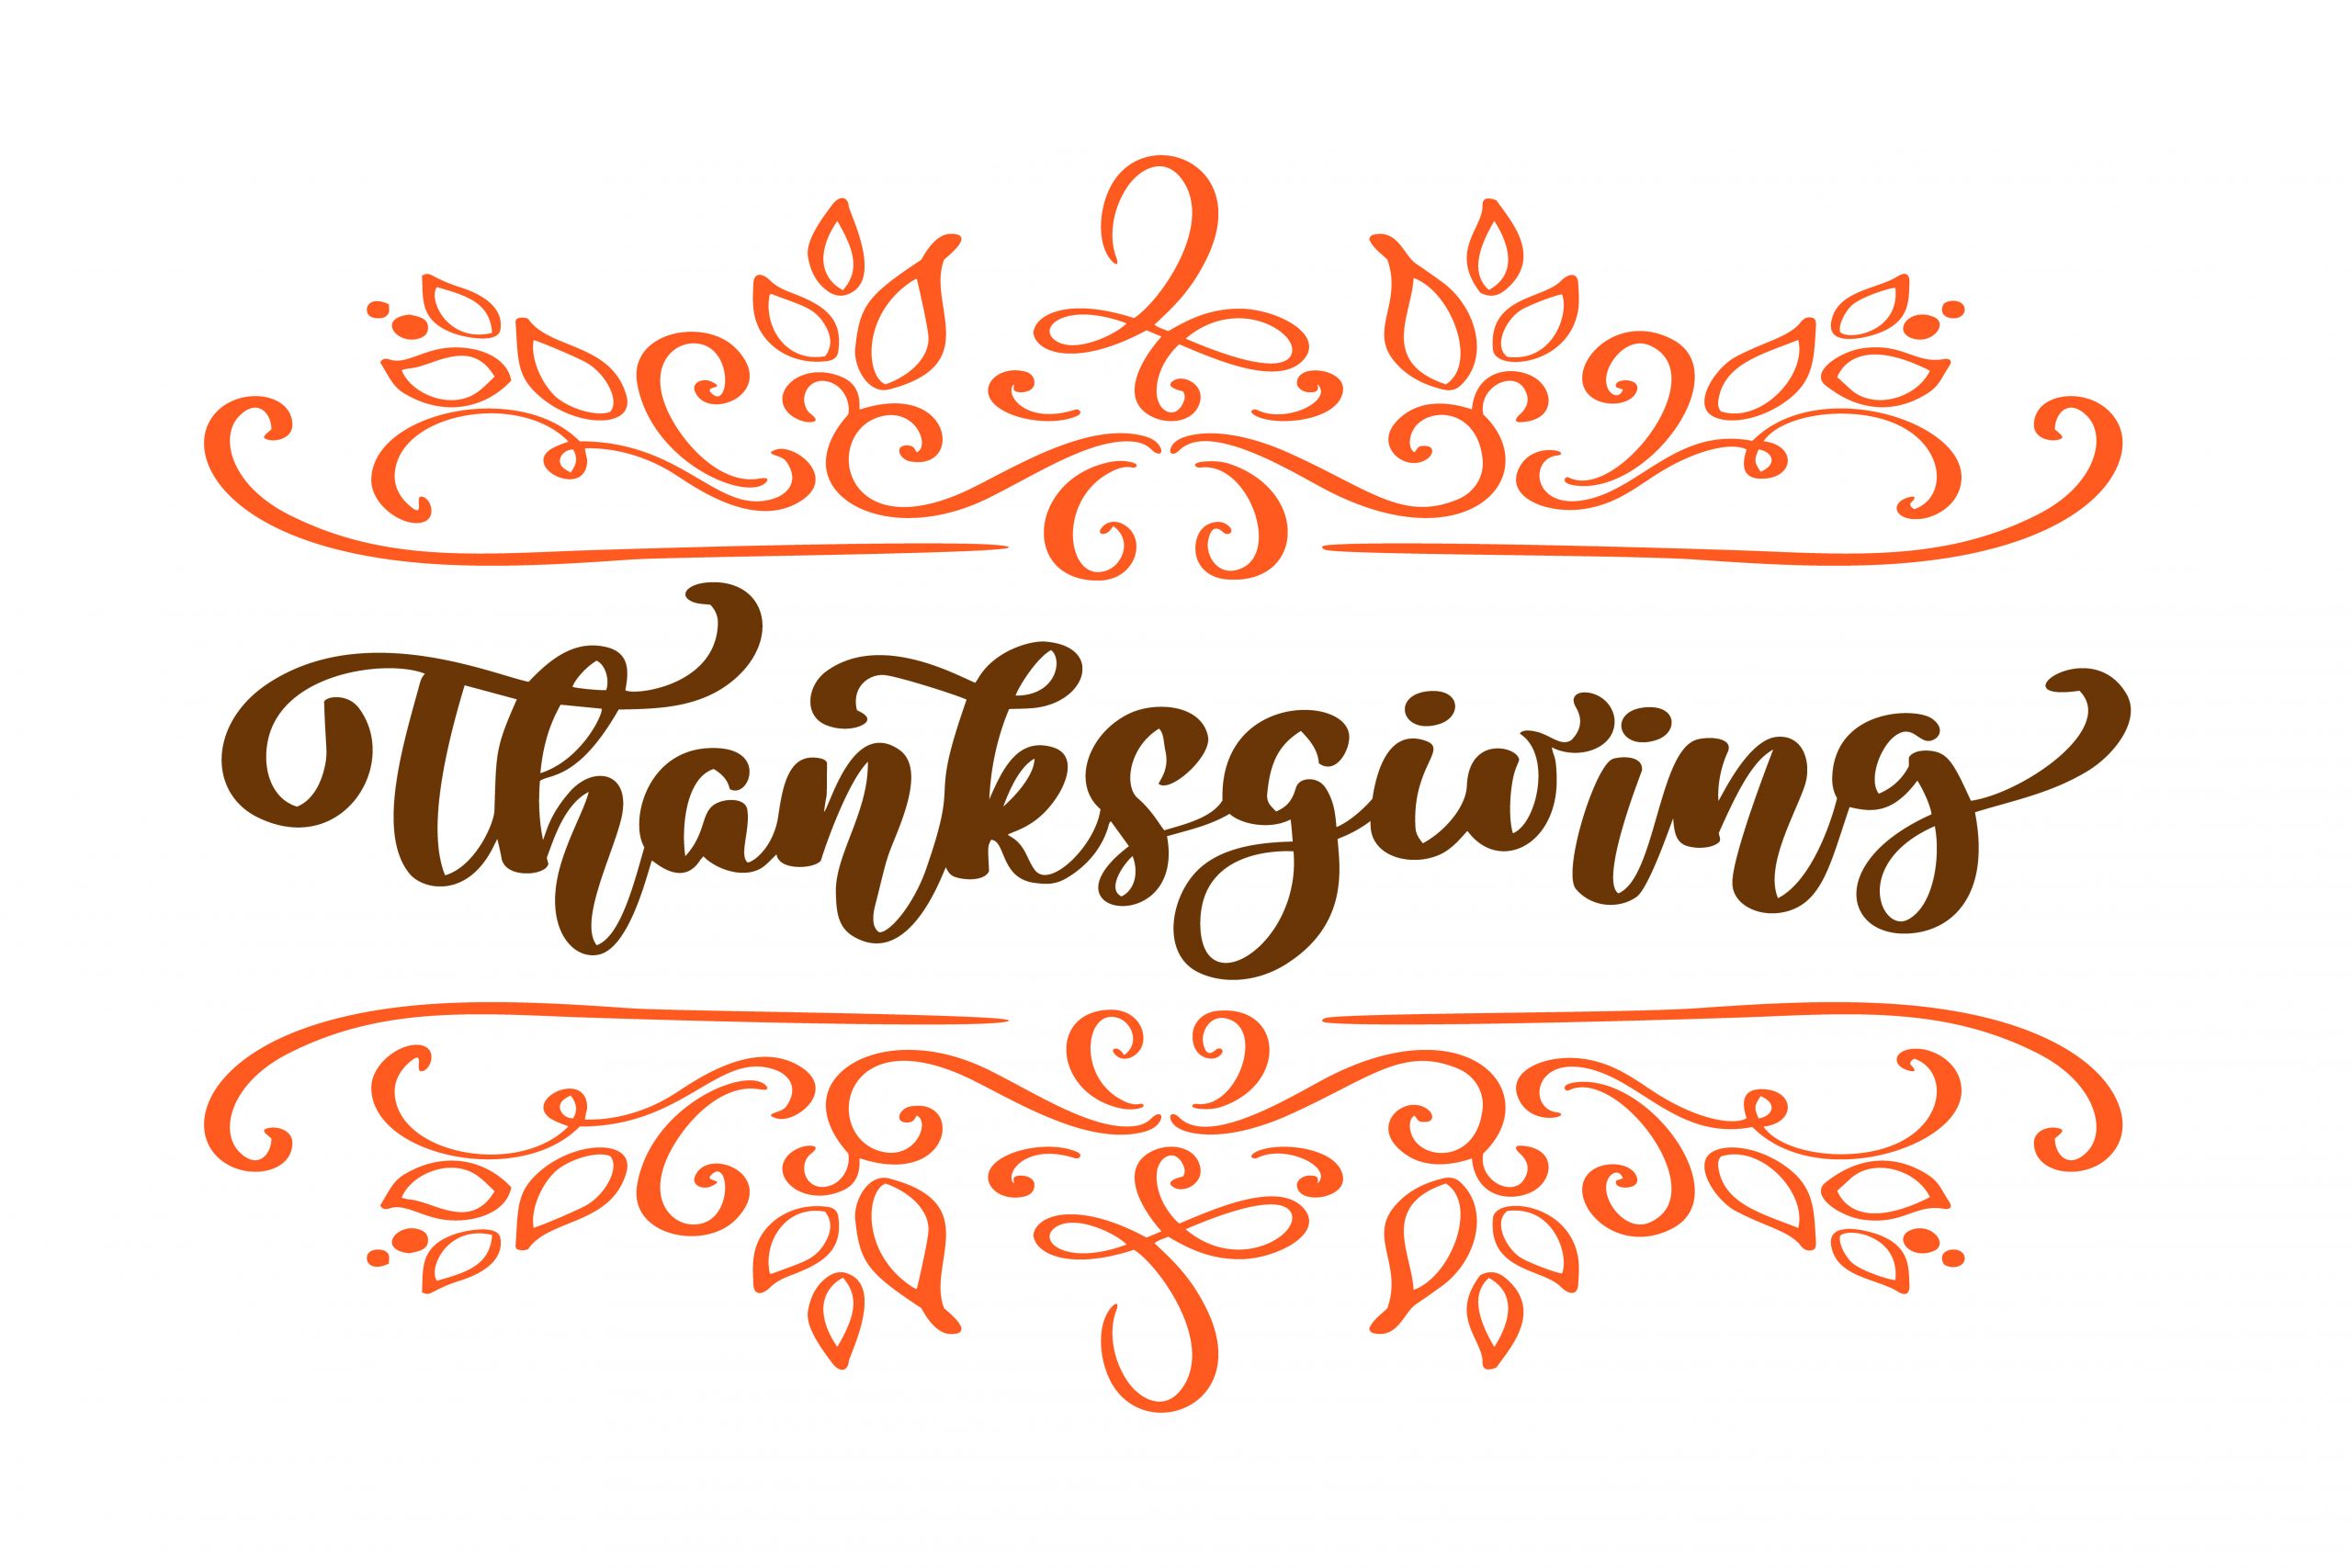 Thanksgiving Quotes Calligraphy
 Happy Thanksgiving Calligraphy Text vector Illustrated